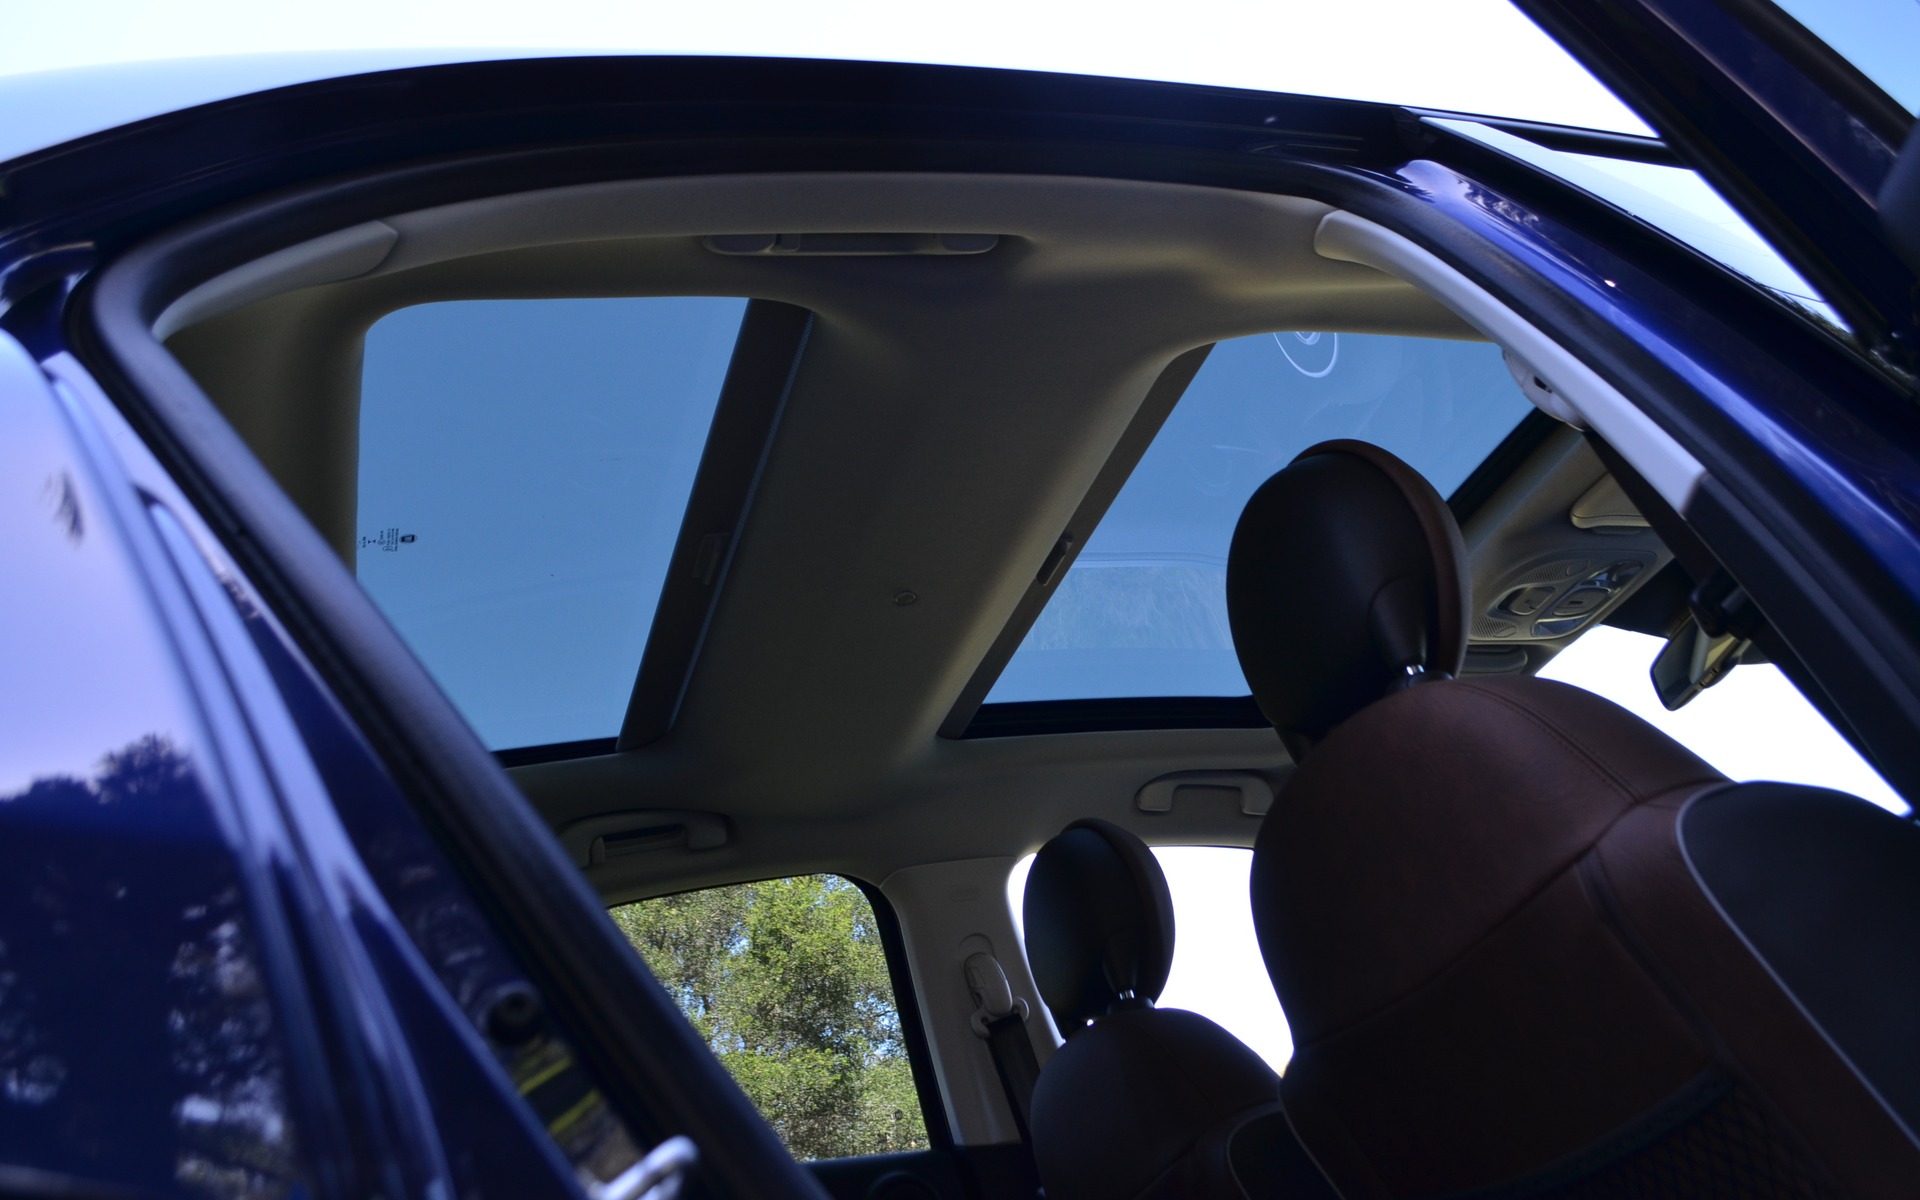 The sunroof is available on all trims, except the Pop.